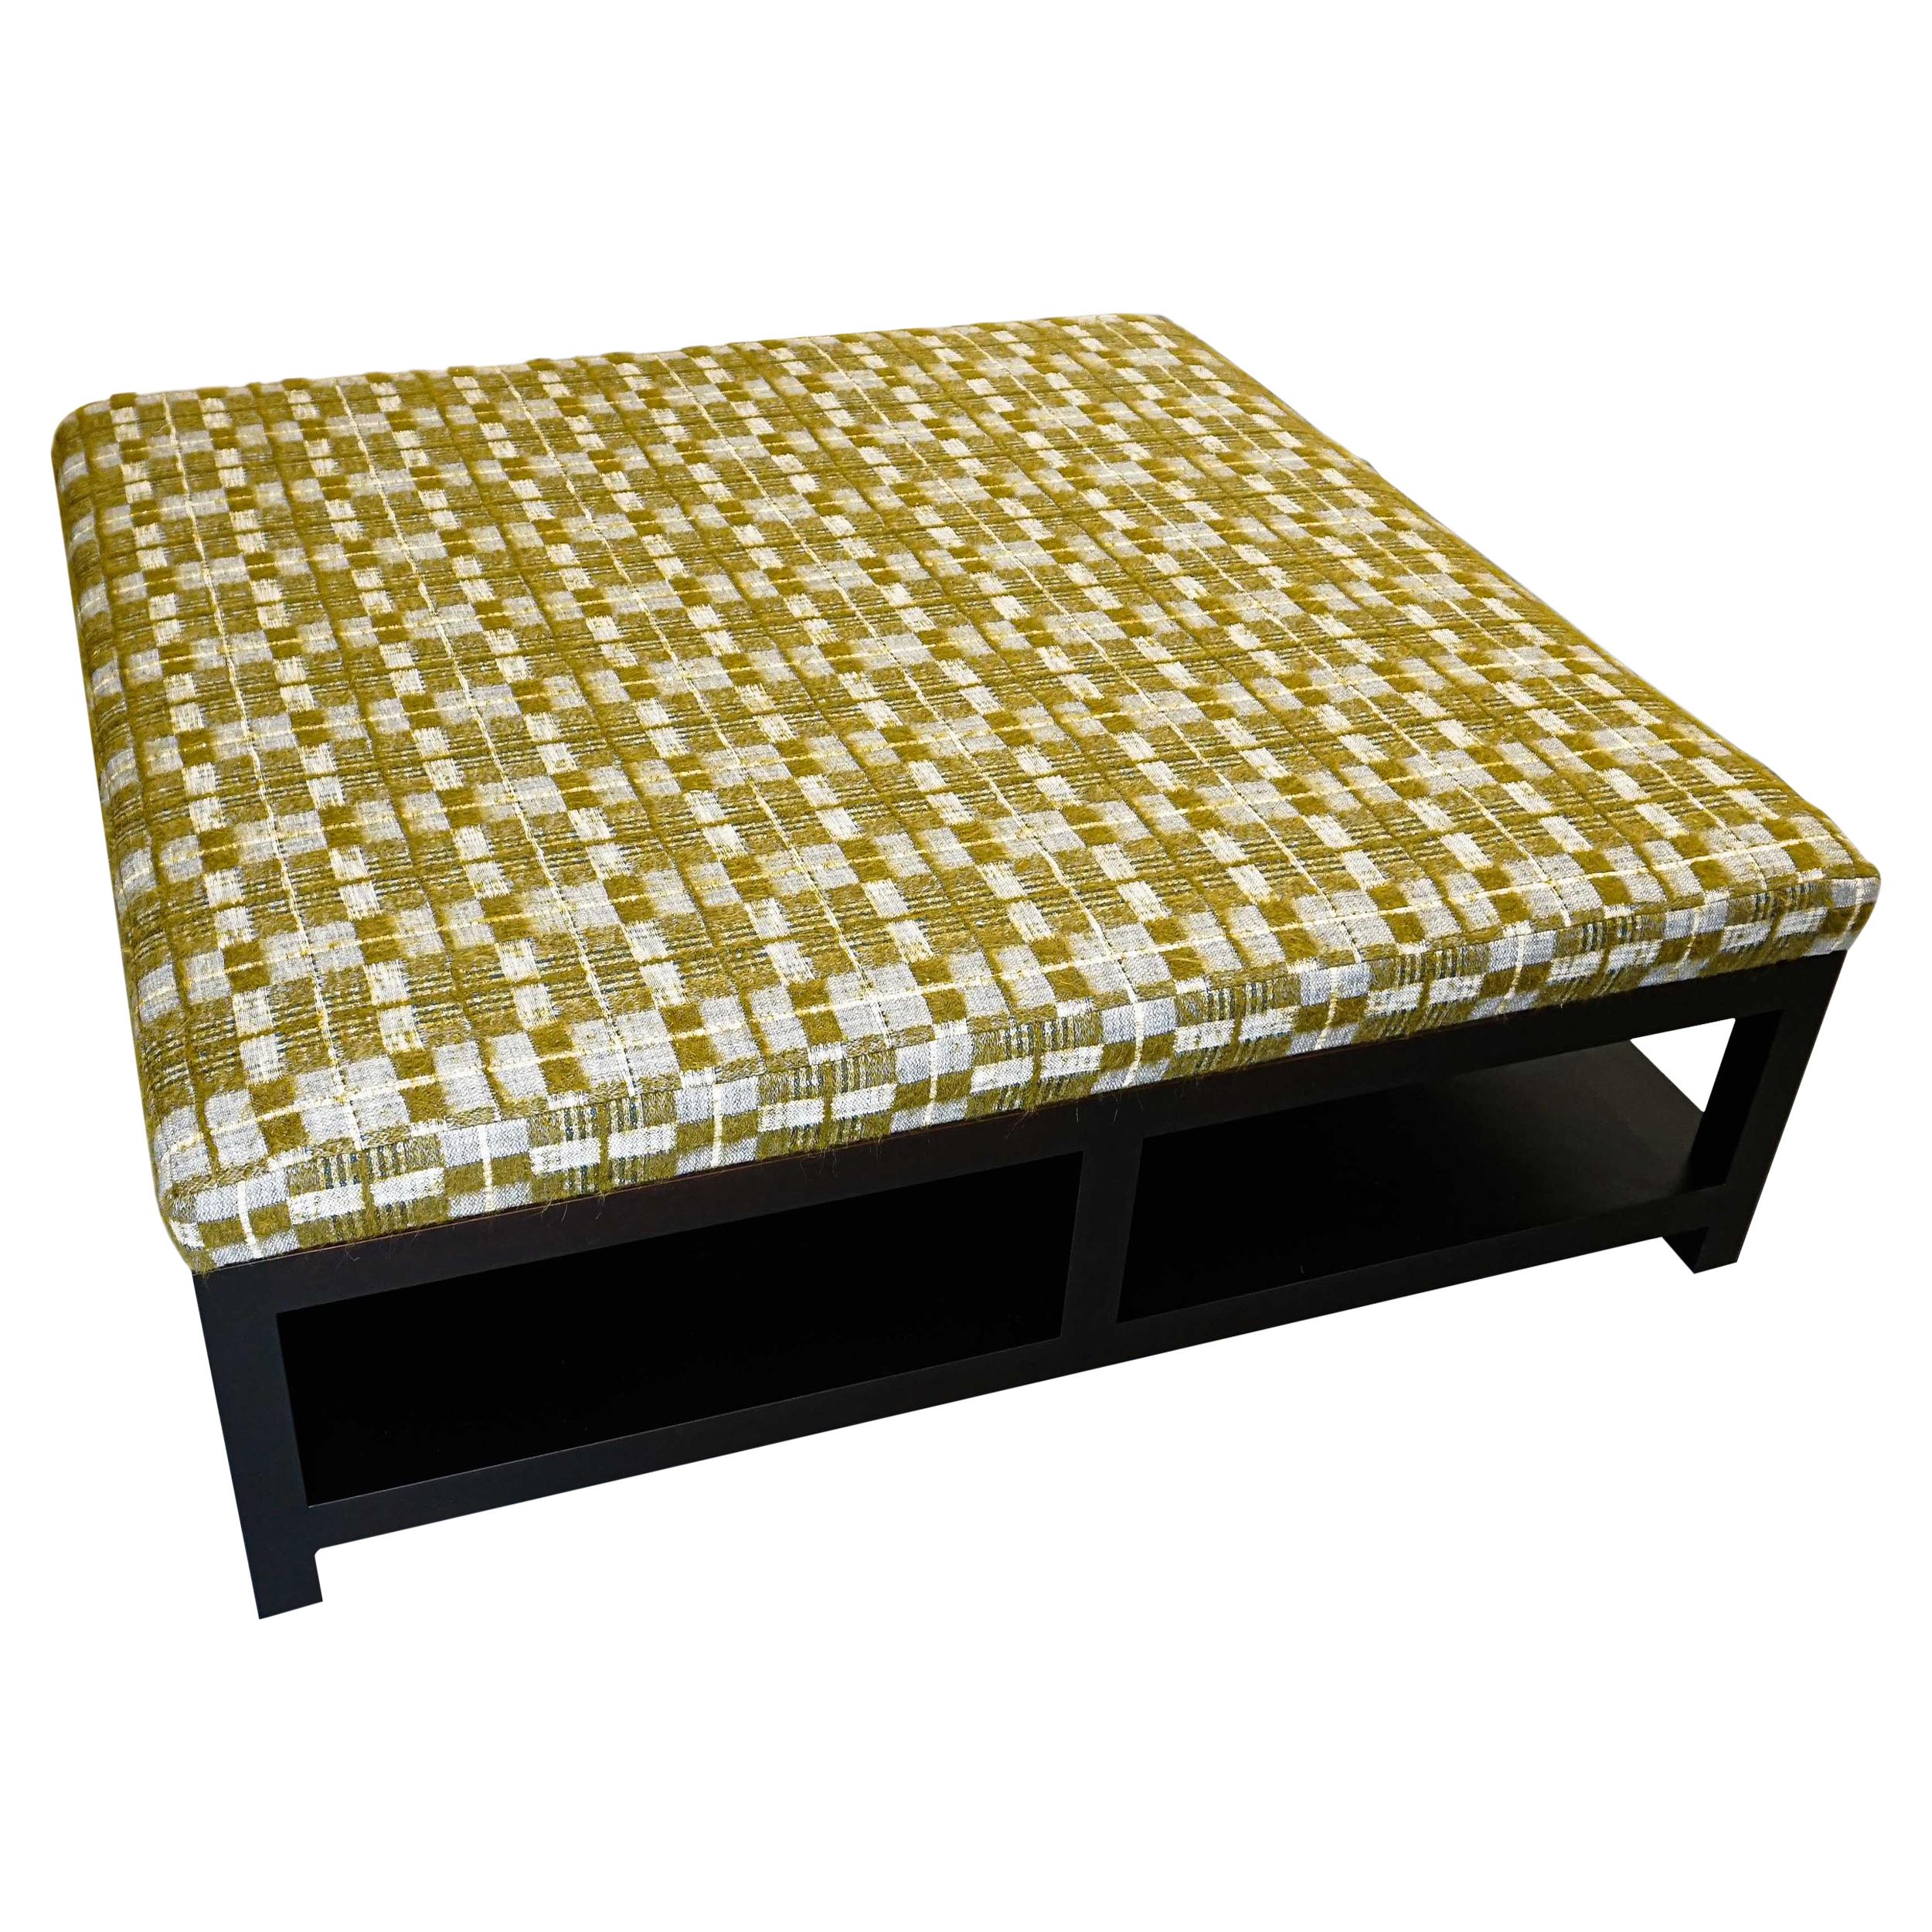 Extra Large Square Ottoman in Check Jacquard Wool Blend